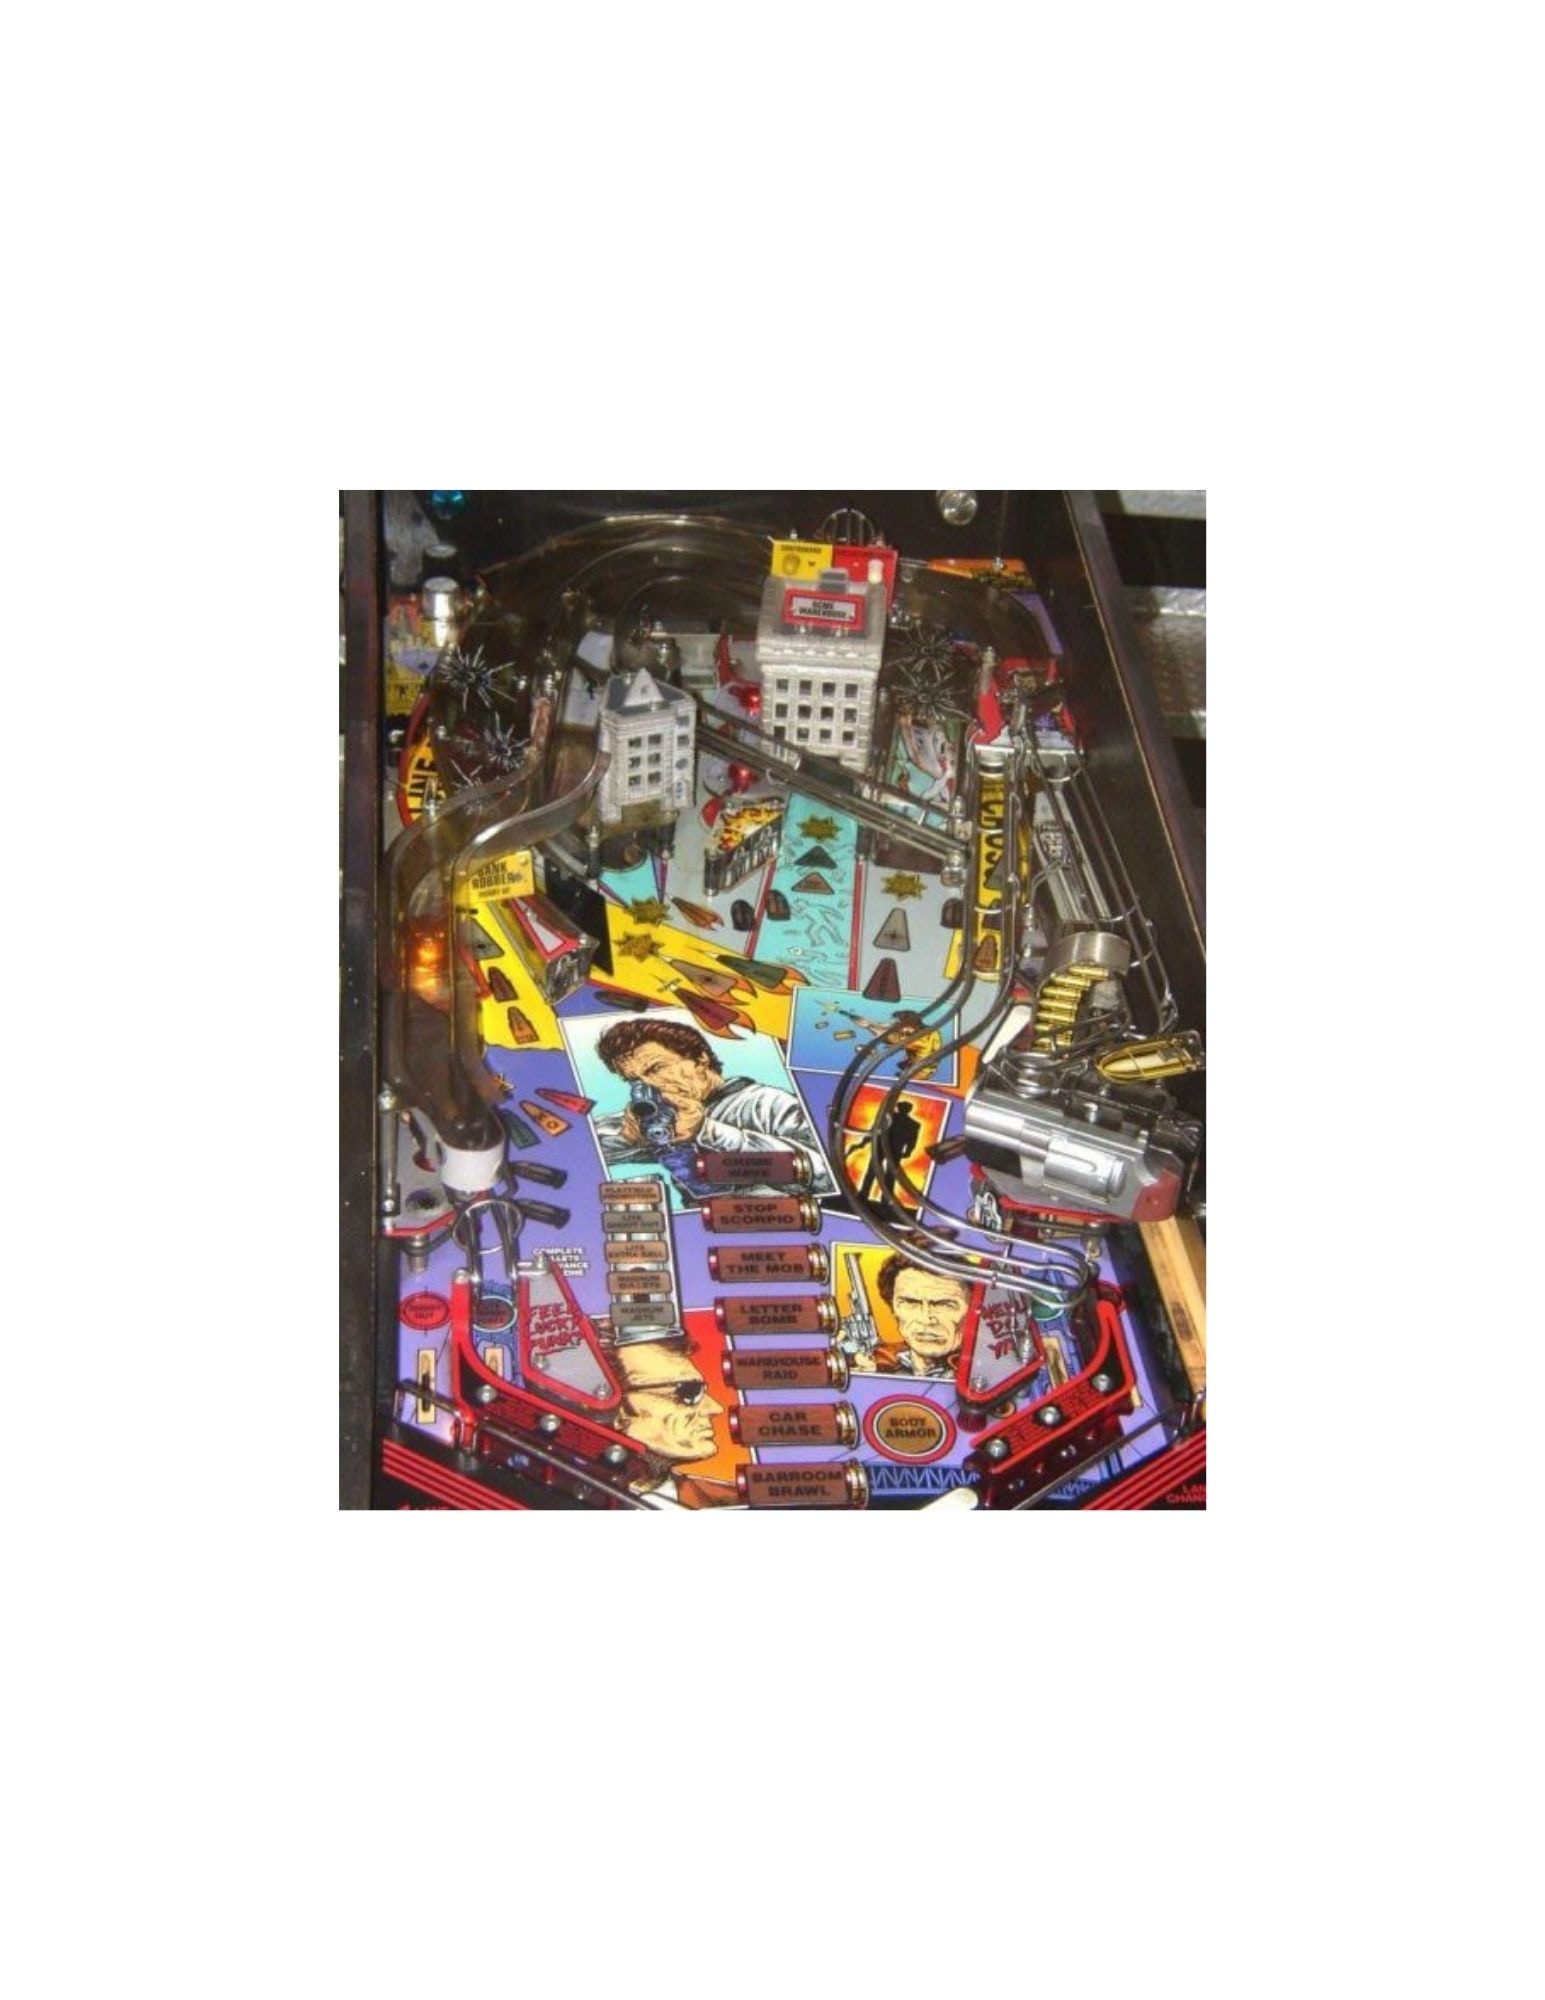 Details about   NOS Williams Dirty Harry Pinball Machine Left Building Safehouse 03-9319.1 